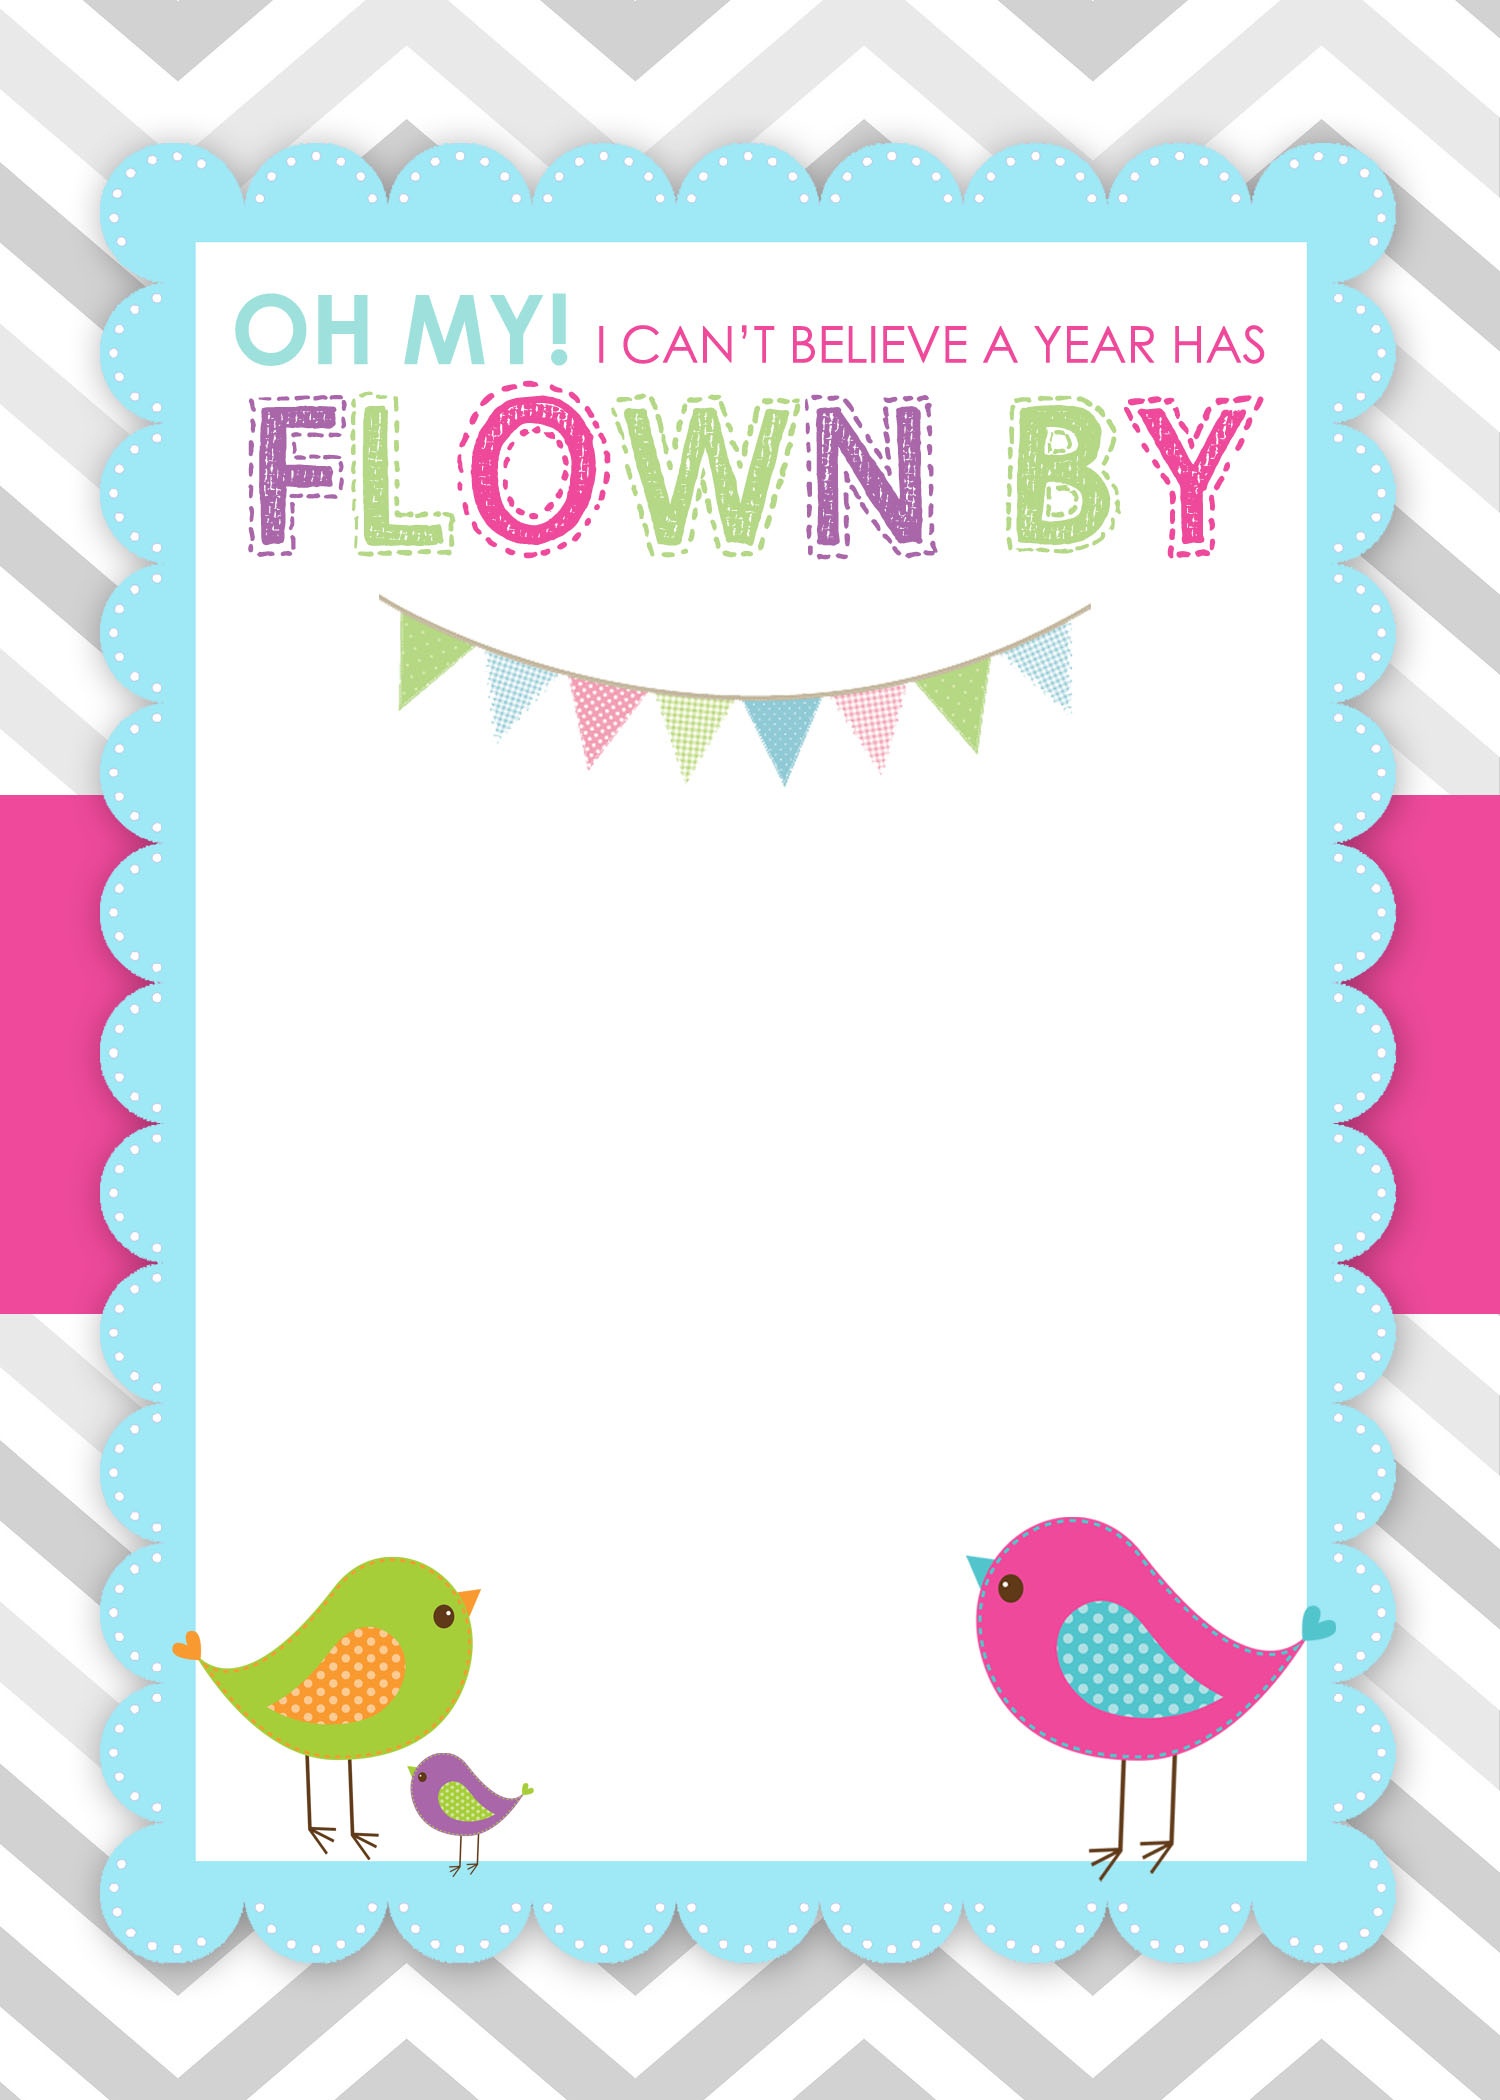 Bird Birthday Party With Free Printables - How To Nest For Less™ - Free Printable Birthday Invitation Cards